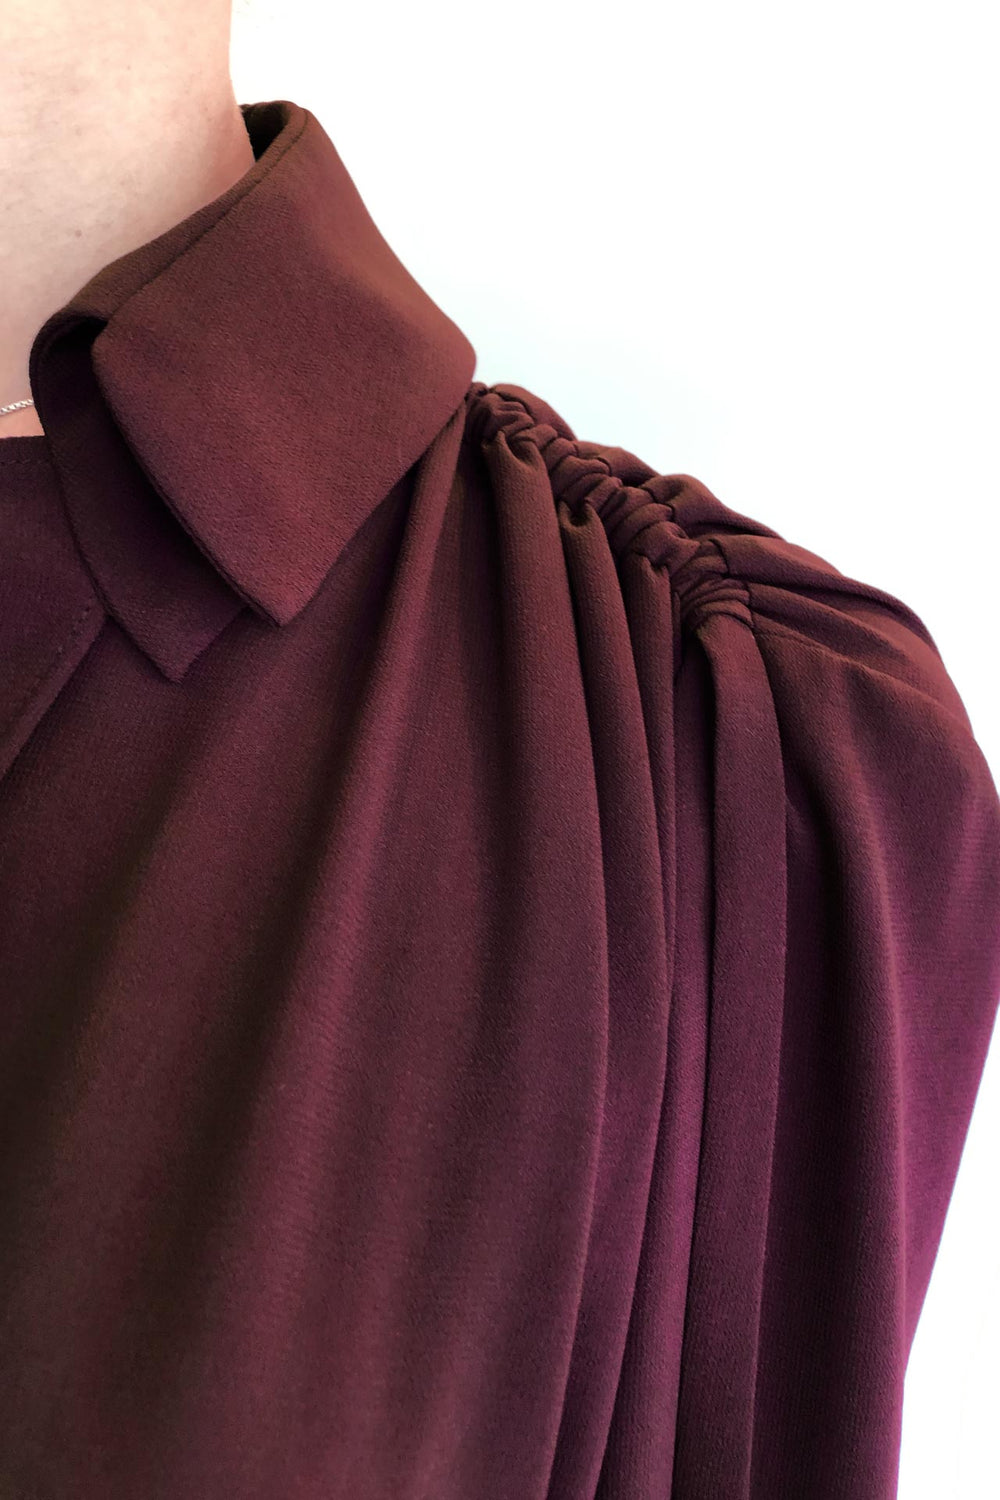 Fashion Designer CARL KAPP collection | Pheasant Onesize Fits All cocktail dress with sleeves Maroon | Sydney Australia